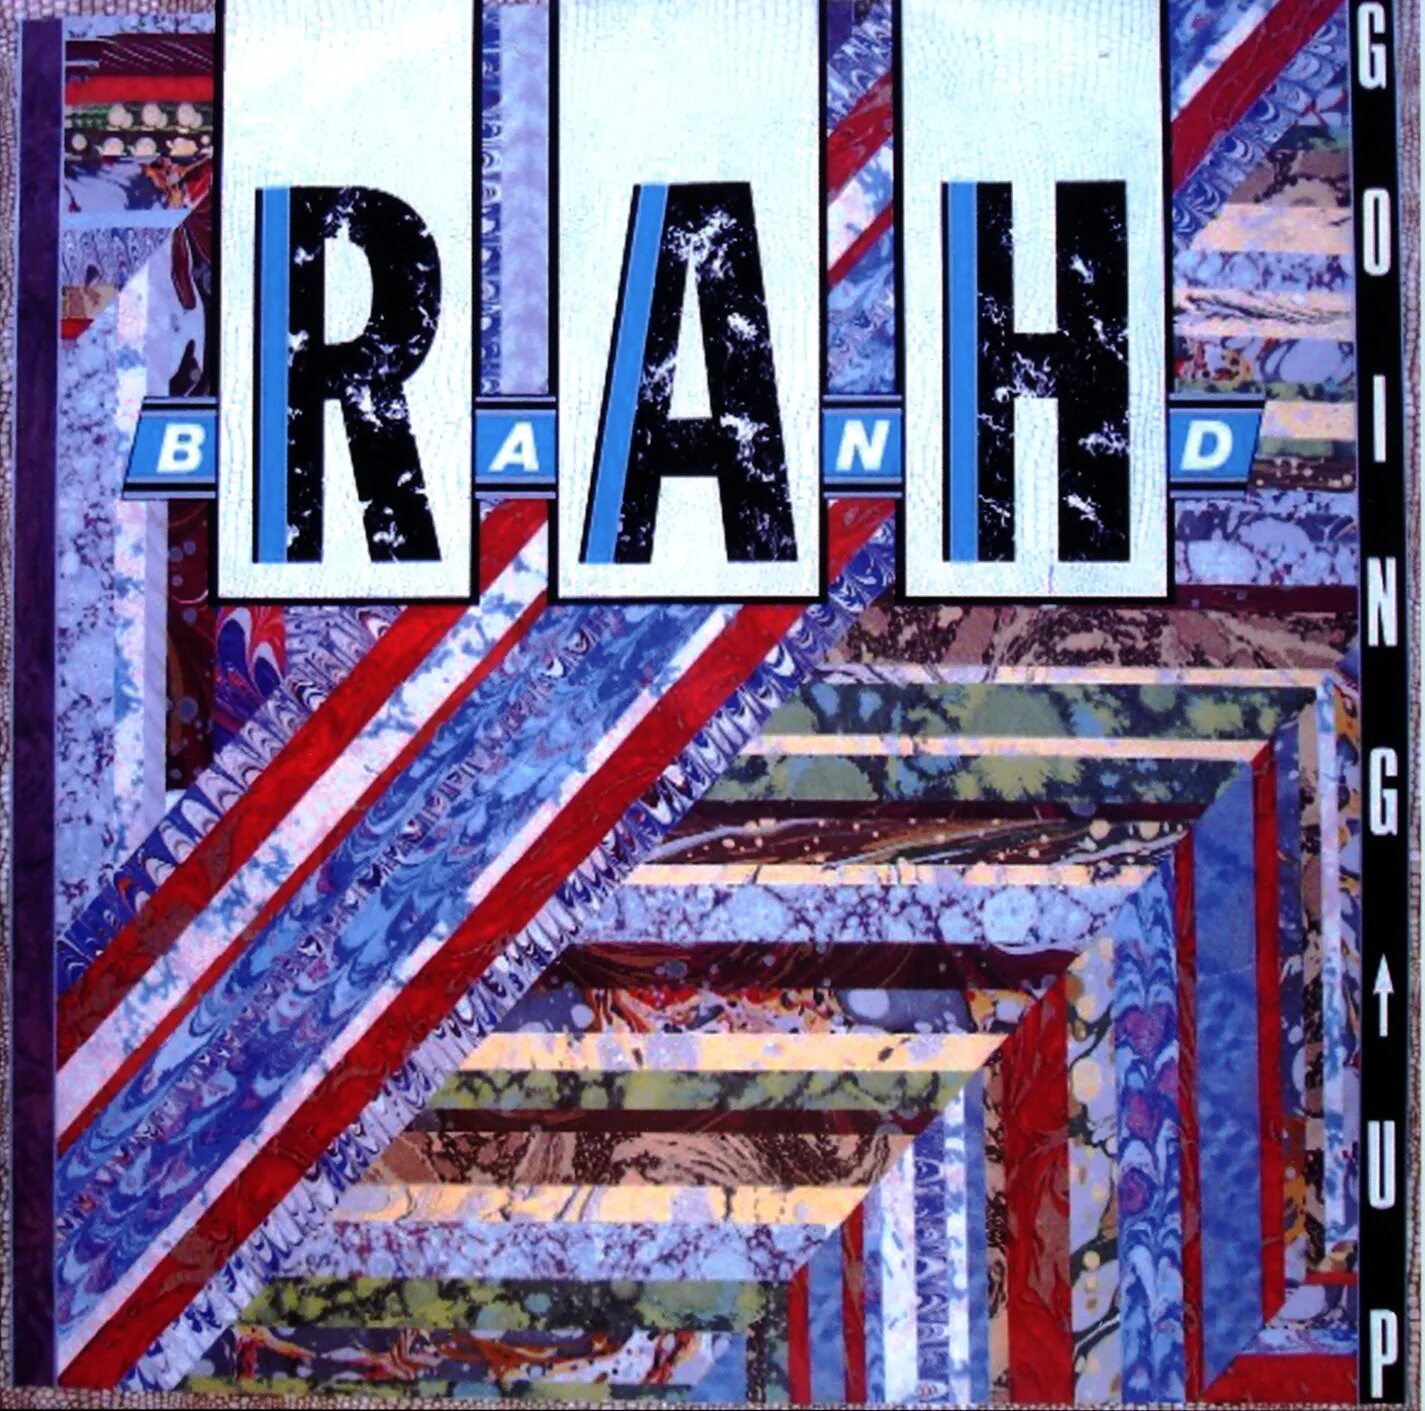 Messages from the stars the rah. Rah Band going up  1983. The Rah Band. Messages from the Stars Rah Band. Richard Anthony Hewson Band.